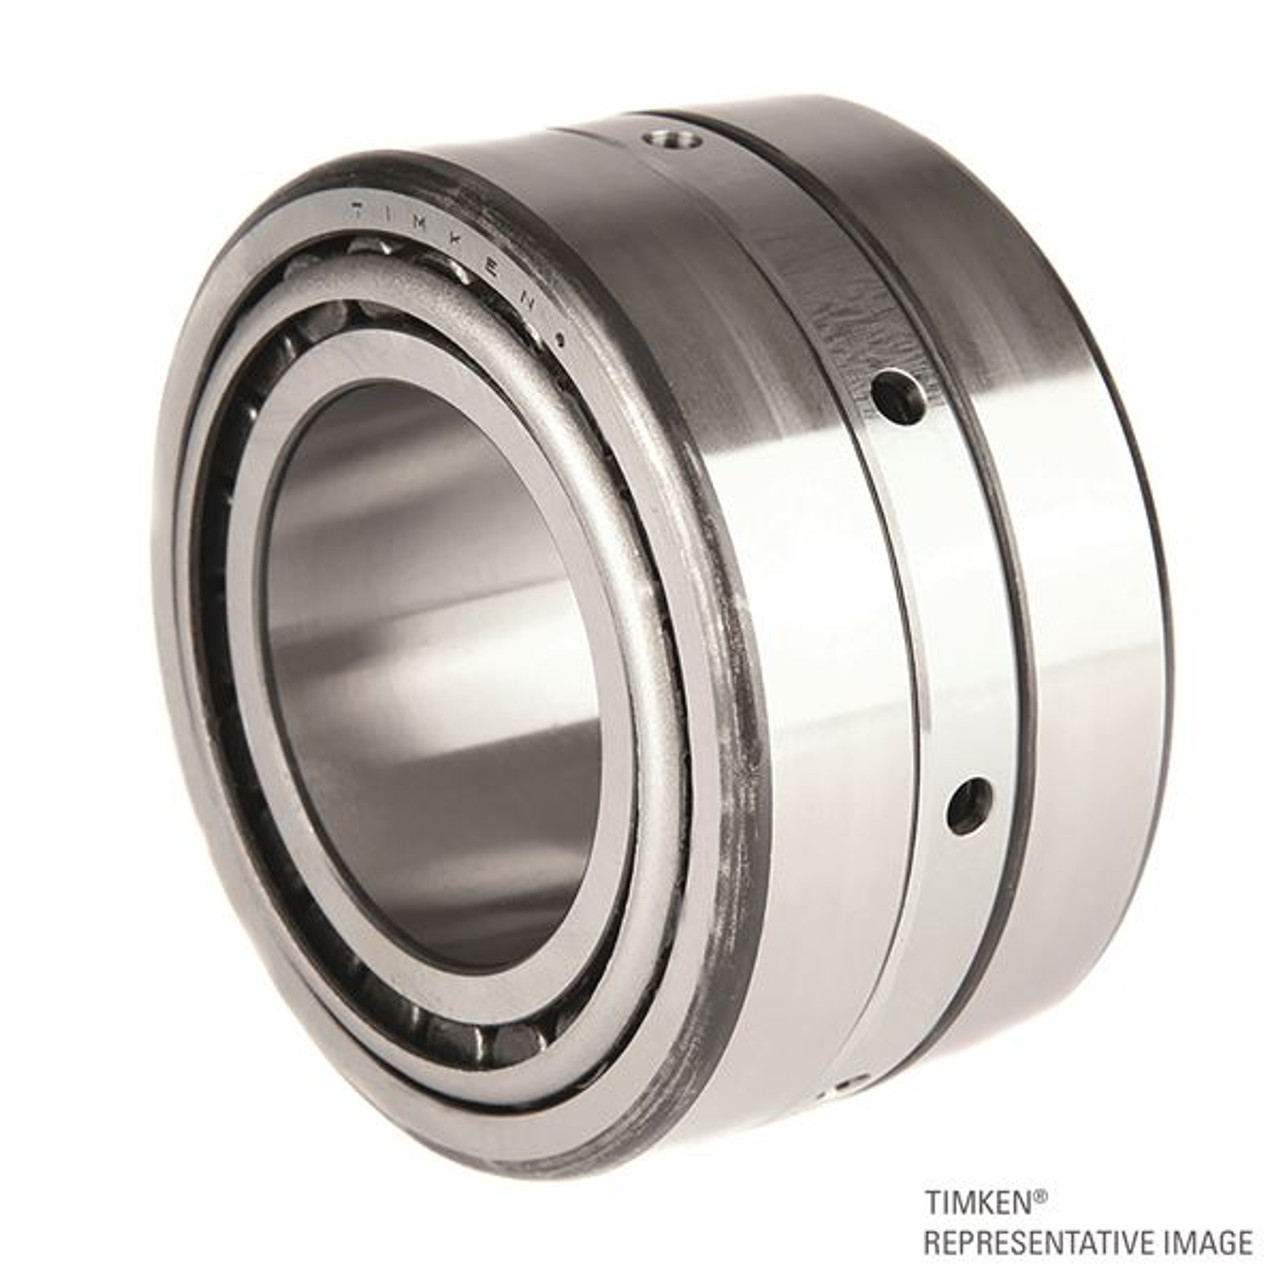 Timken® TDI Single Double Cone Assembly  NA483SW-90236